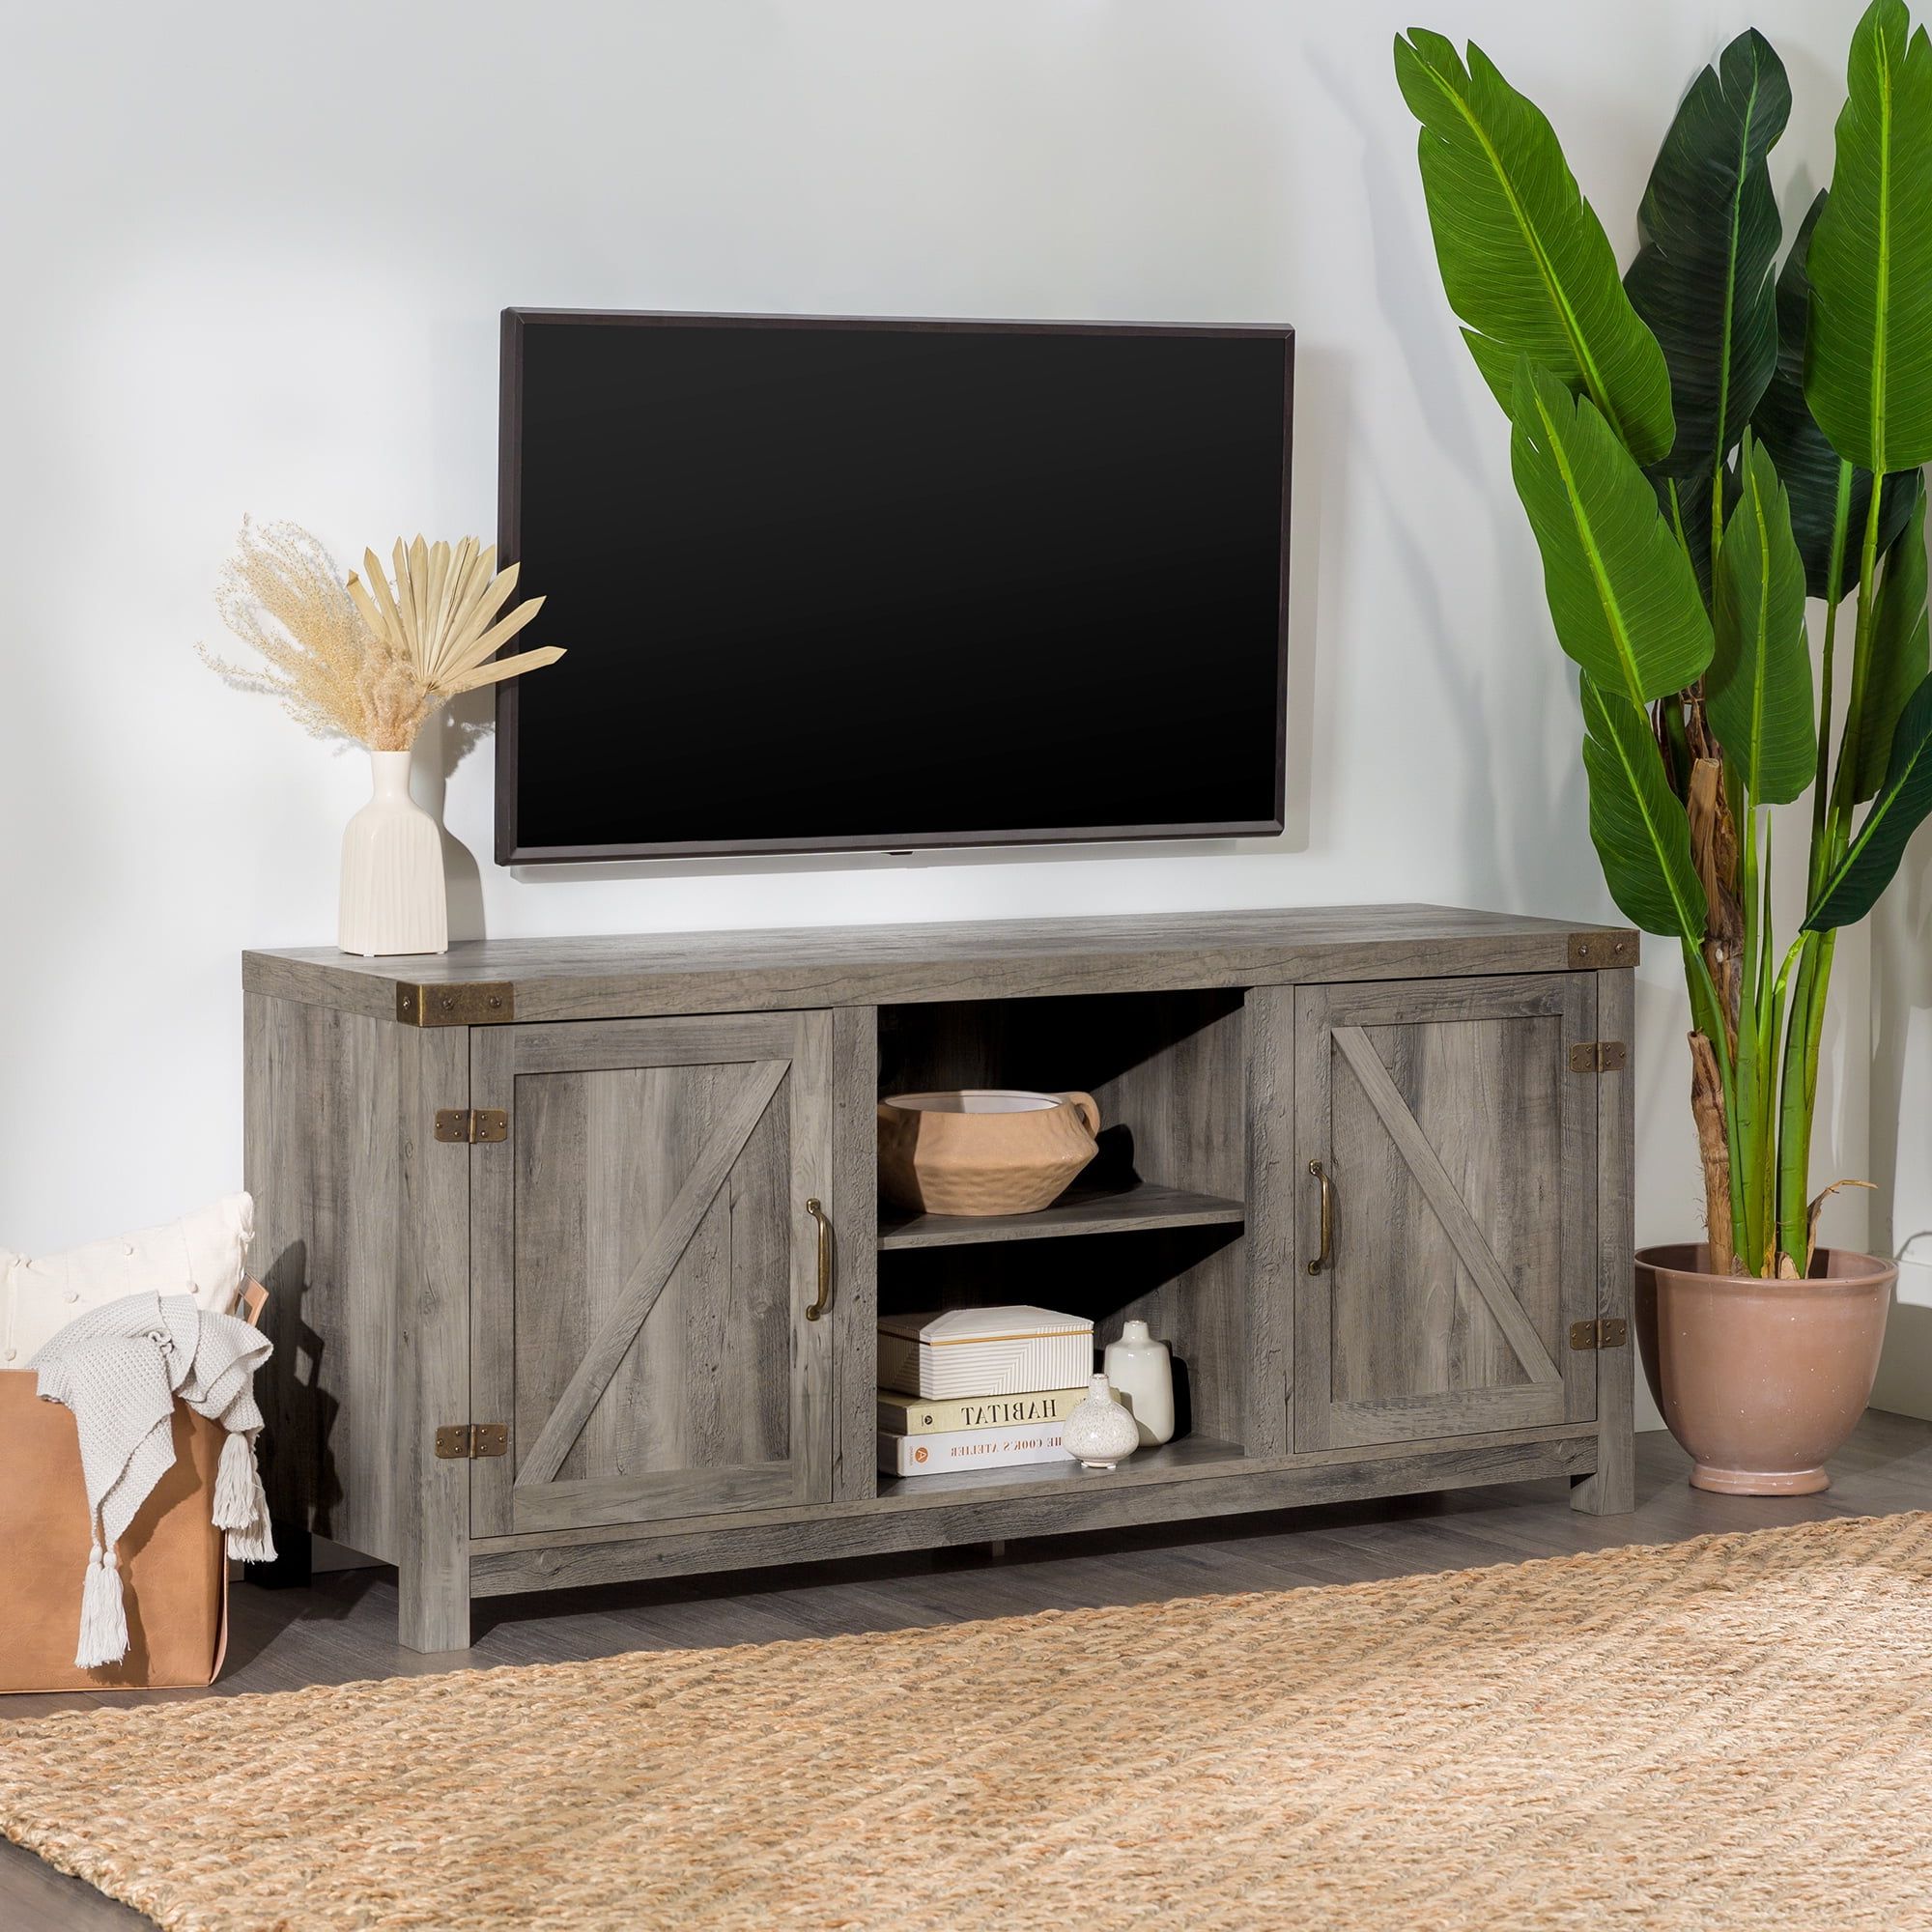 Woven Paths Modern Farmhouse Barn Door Tv Stand For Tvs Up To 65″, Grey Within Well Known Modern Farmhouse Barn Tv Stands (View 13 of 15)